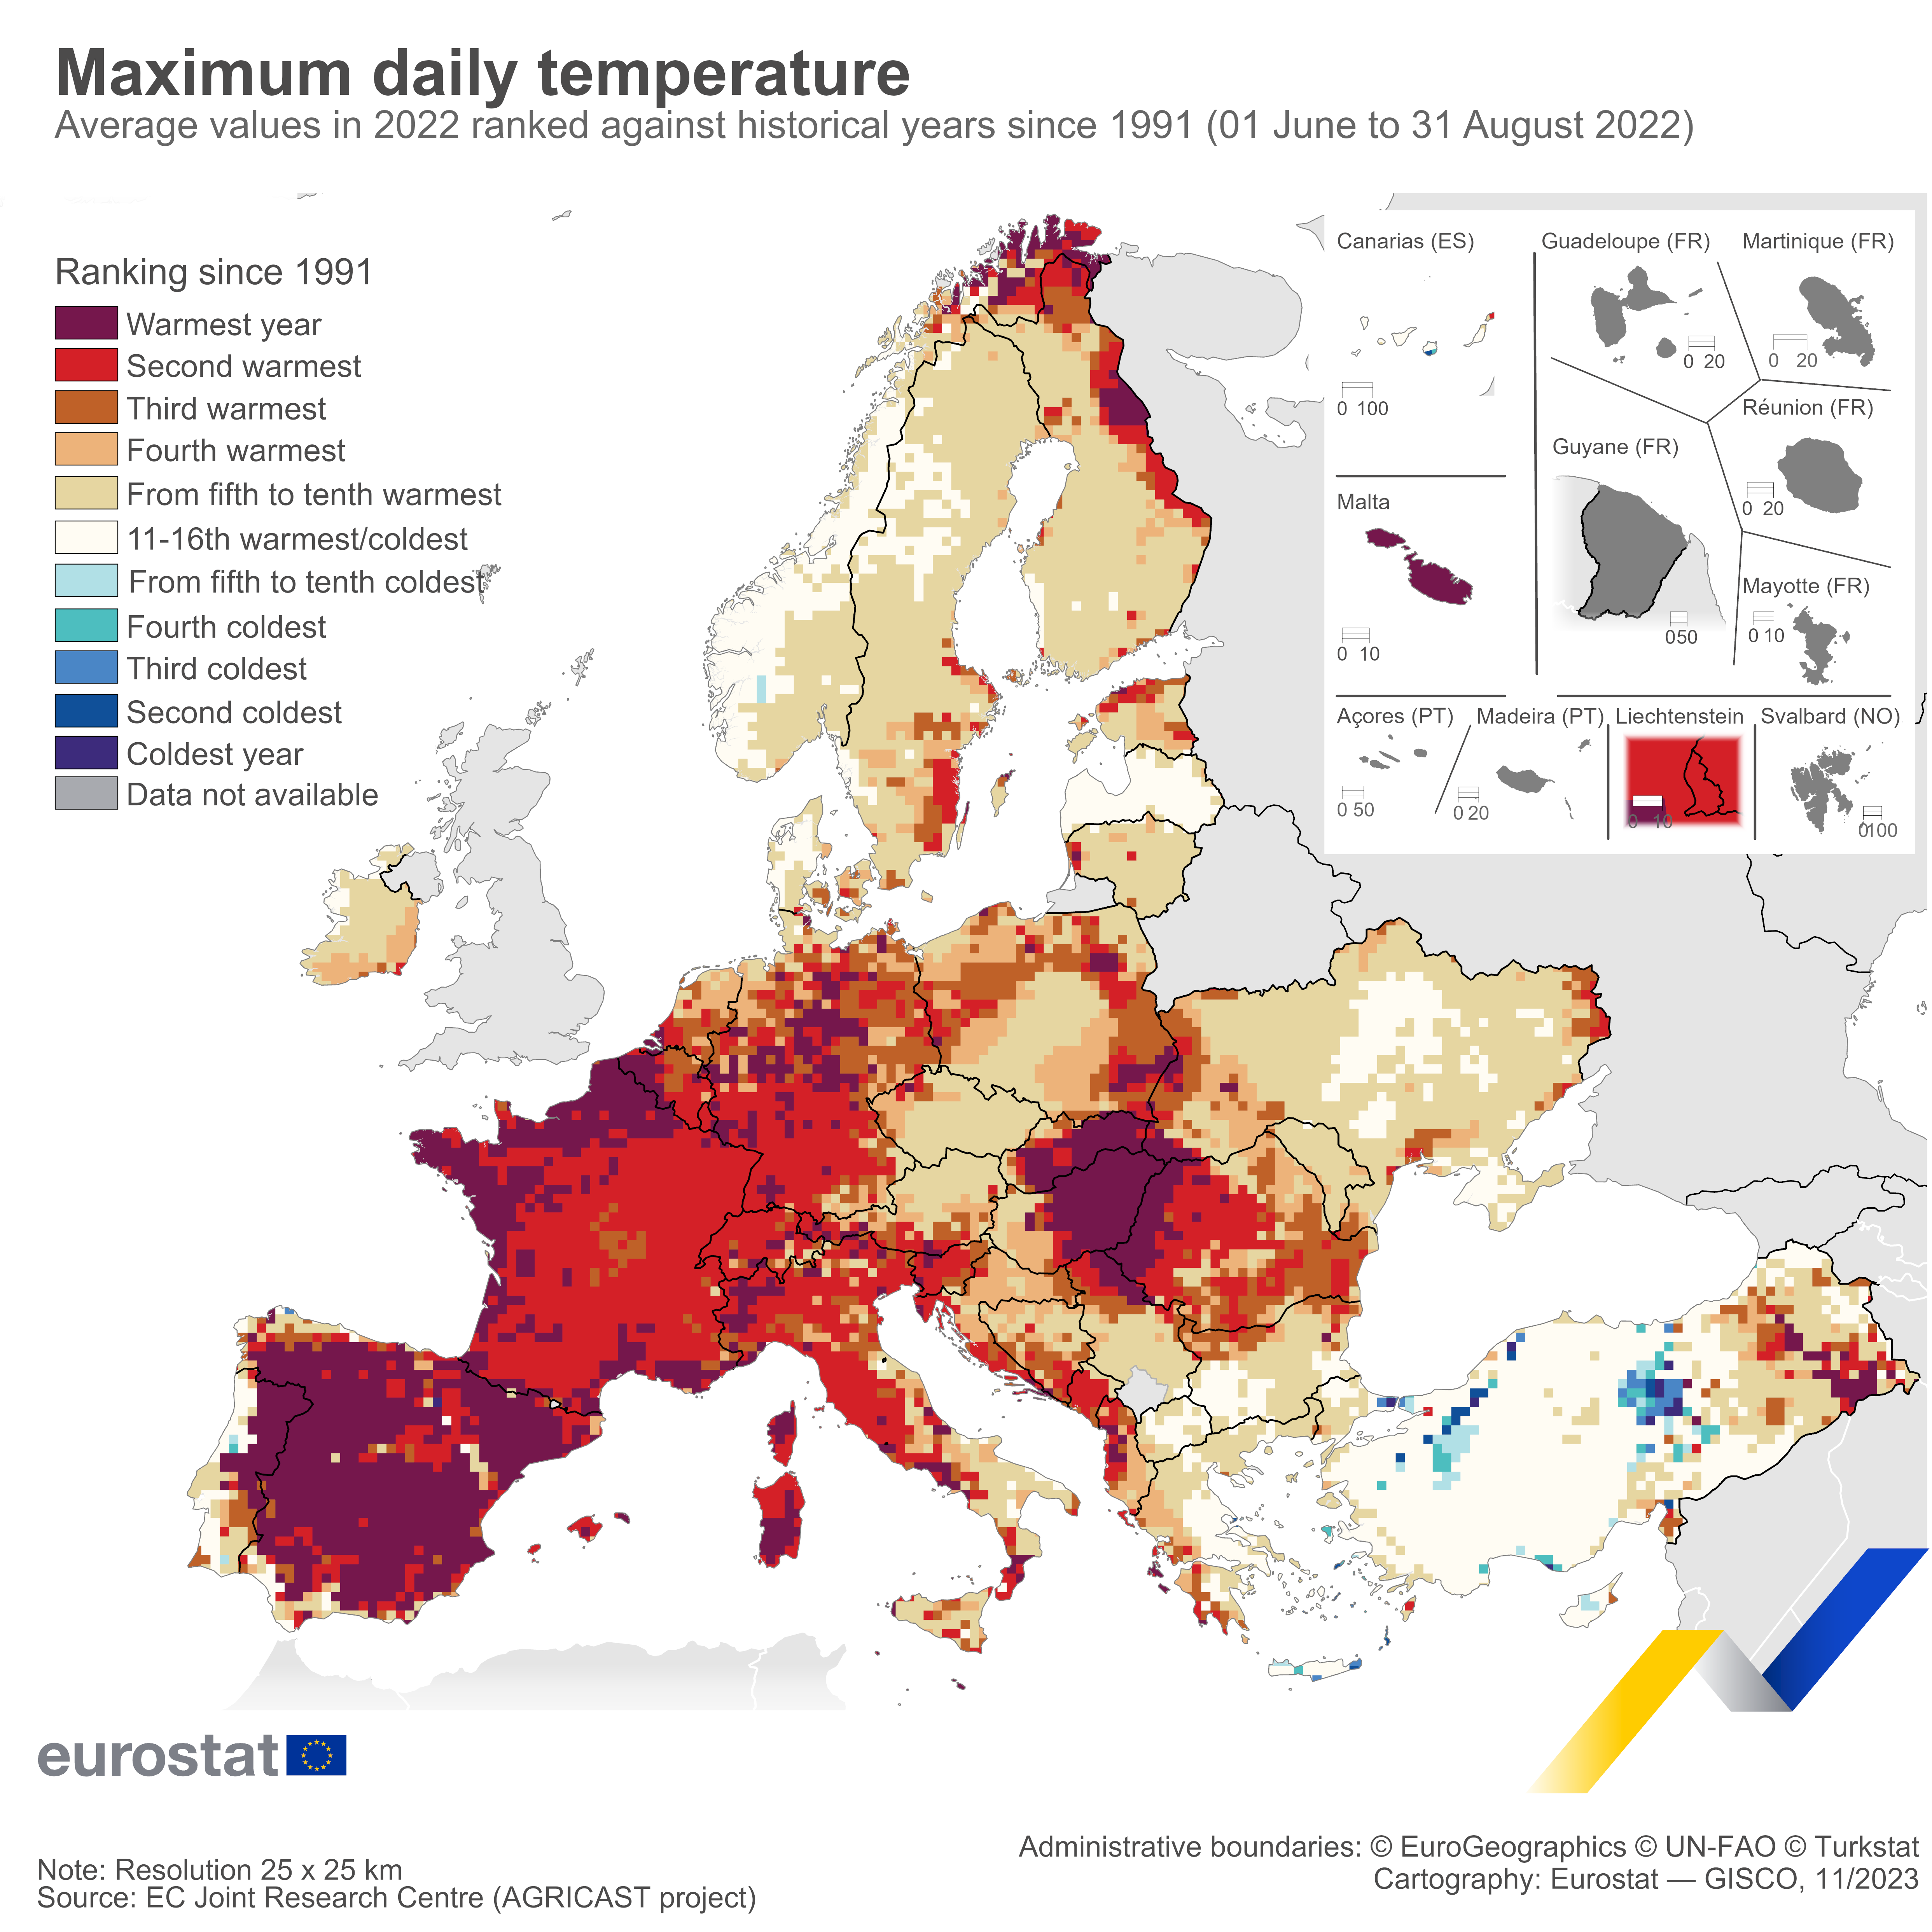 Maximum daily temperatures, June-August 2022, ranked against historical years since 1991